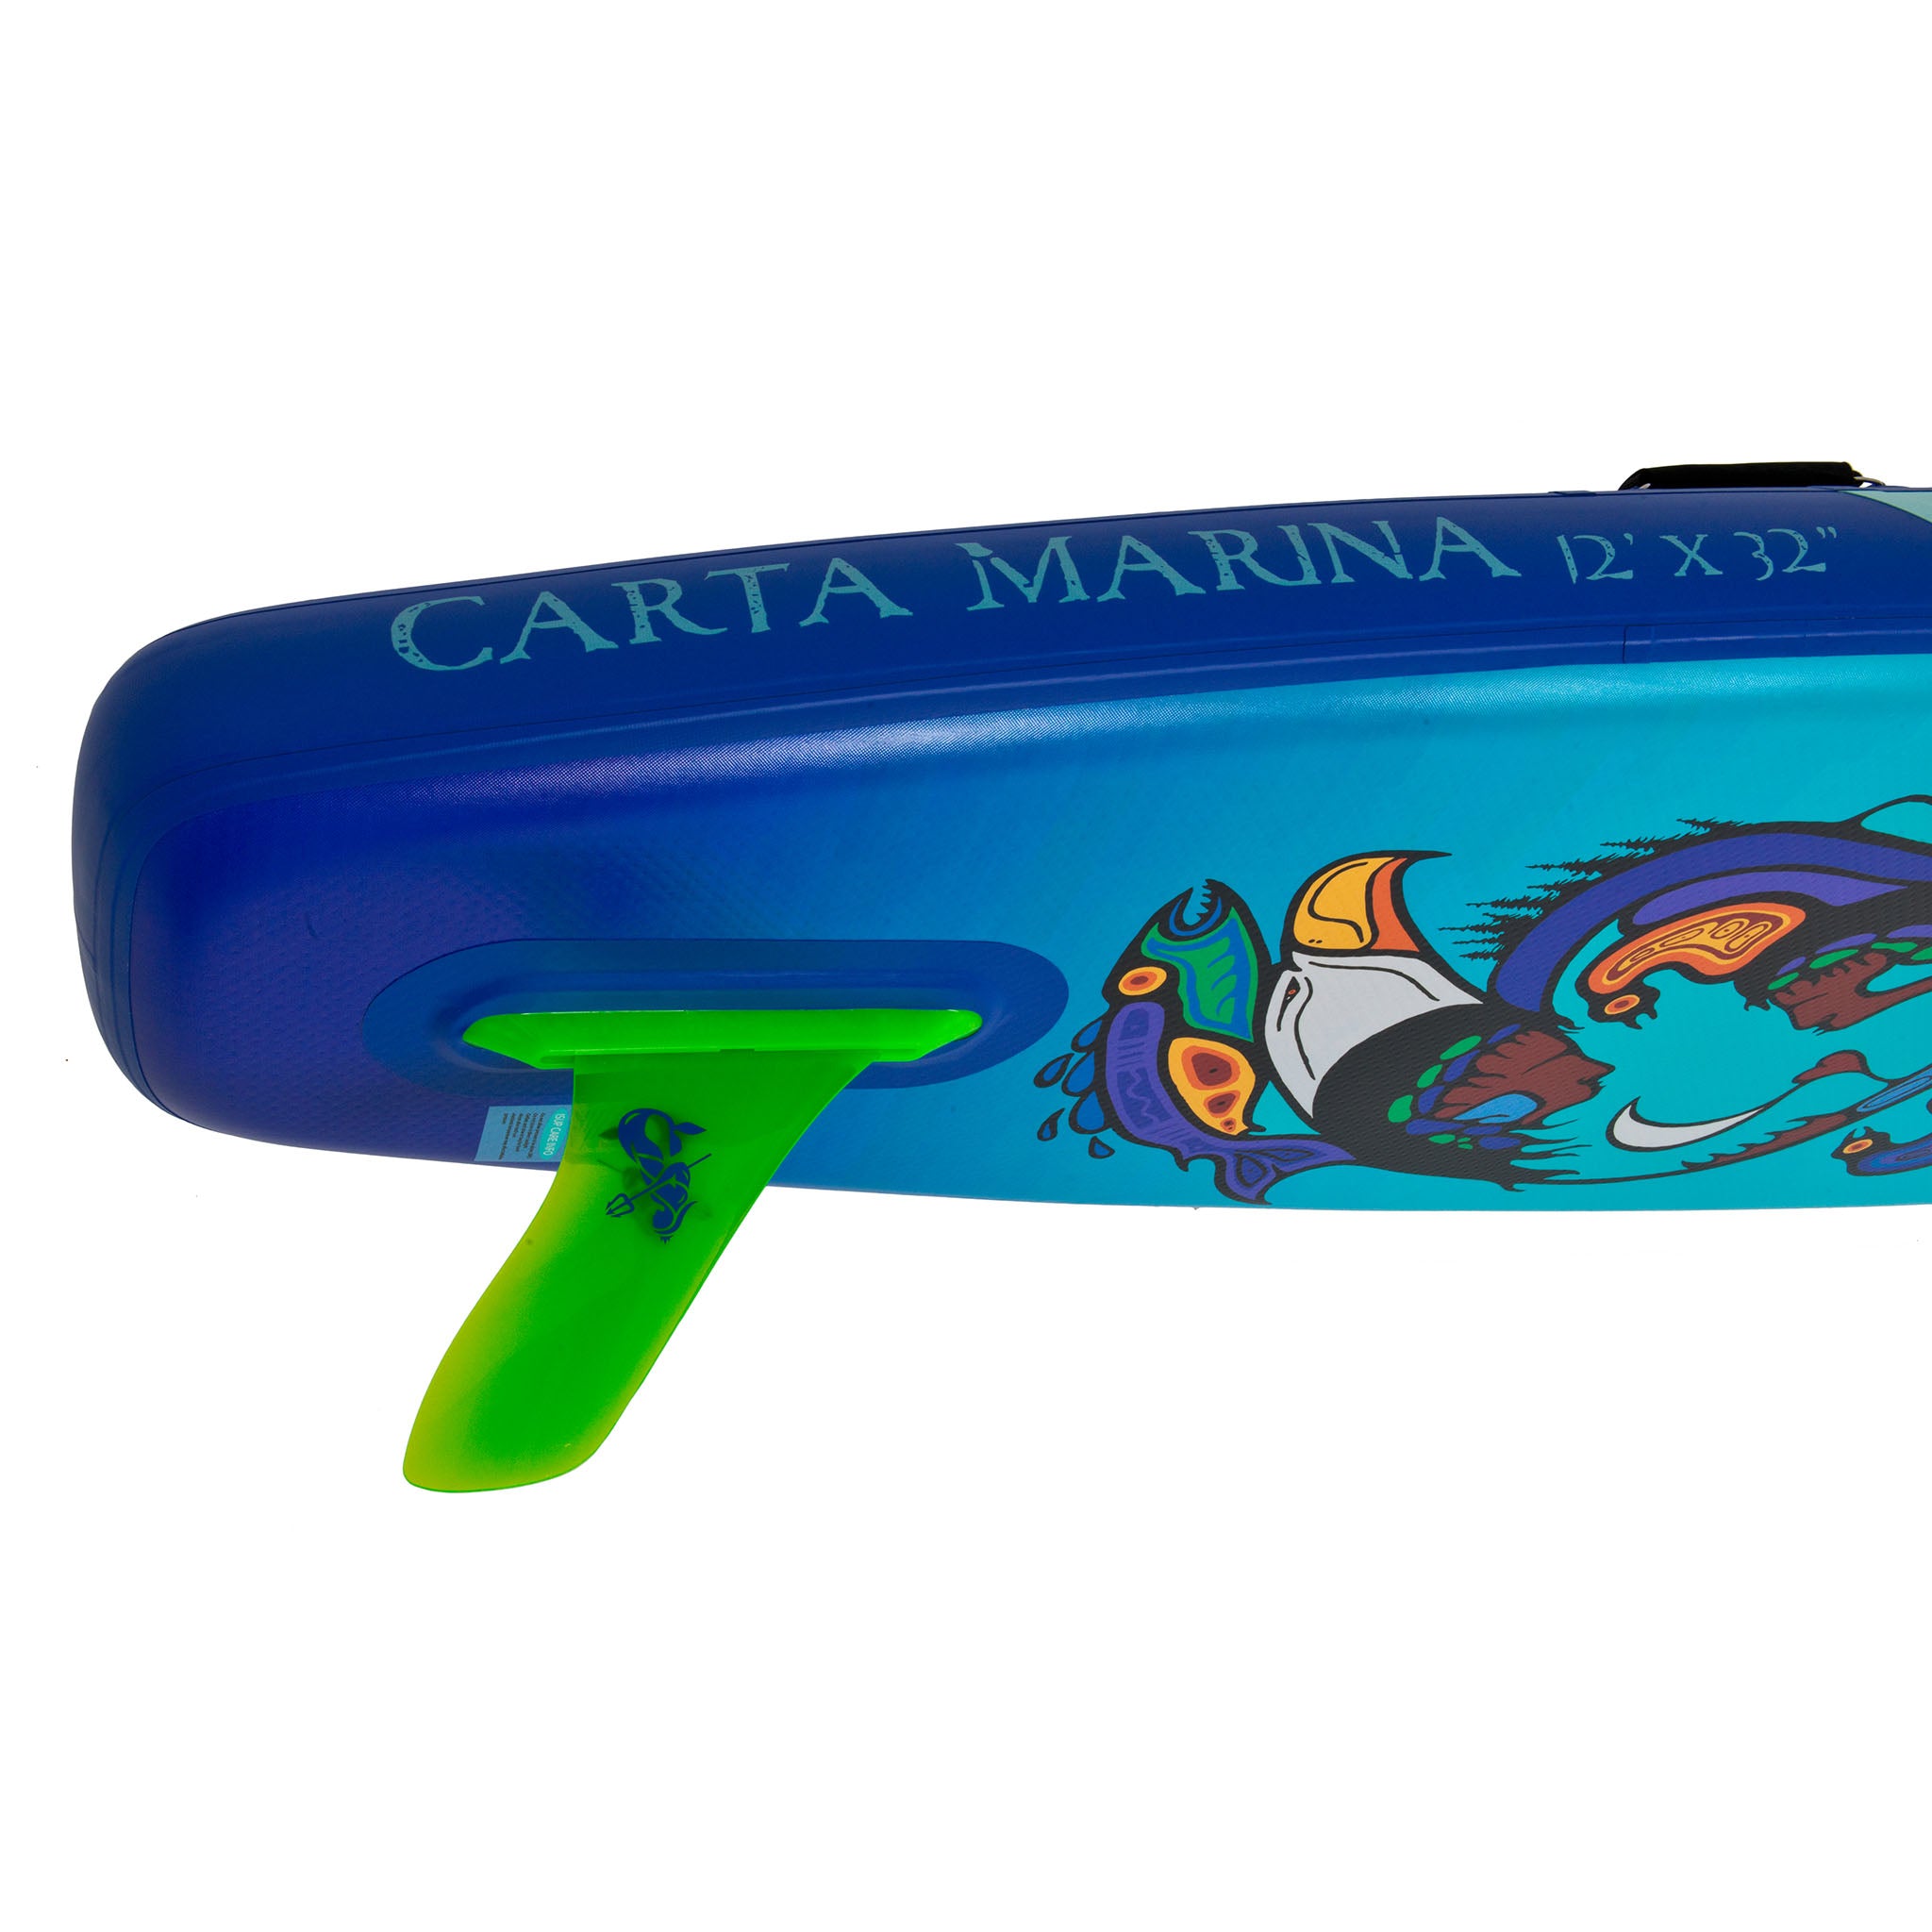 Carta Marina bottom featuring the 9-inch SUP Touring Flex Fin with Click Fin Proprietary Tooless Kumano System